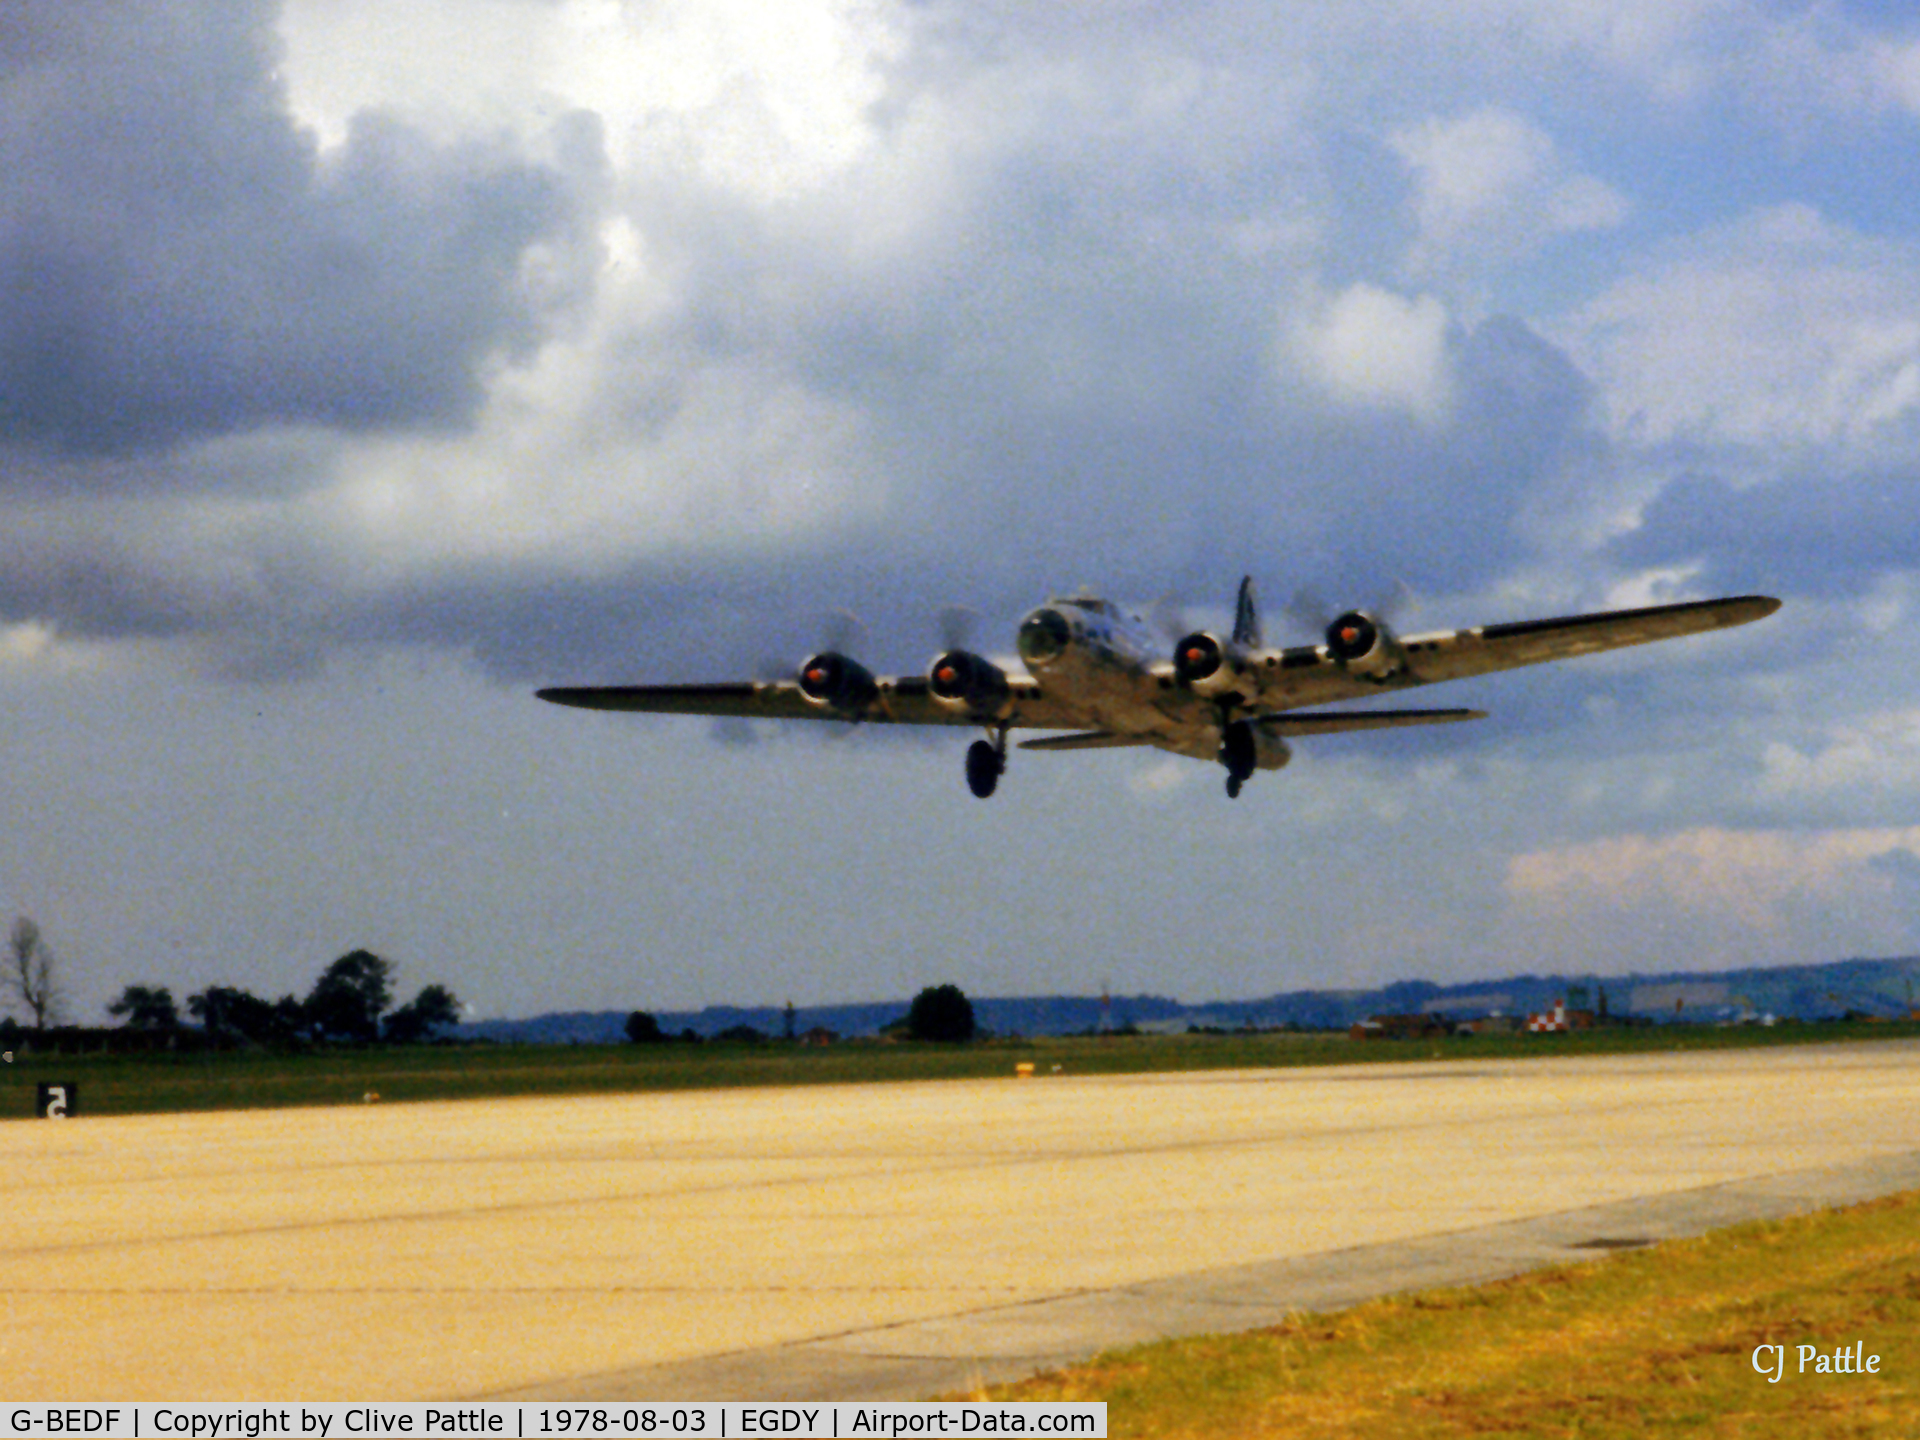 G-BEDF, 1944 Boeing B-17G Flying Fortress C/N 8693, Scanned from print. B-17 G-BEDF in her 'Sally B' silver scheme lifts off from RNAS Yeovilton in August '78 during the Air Day.